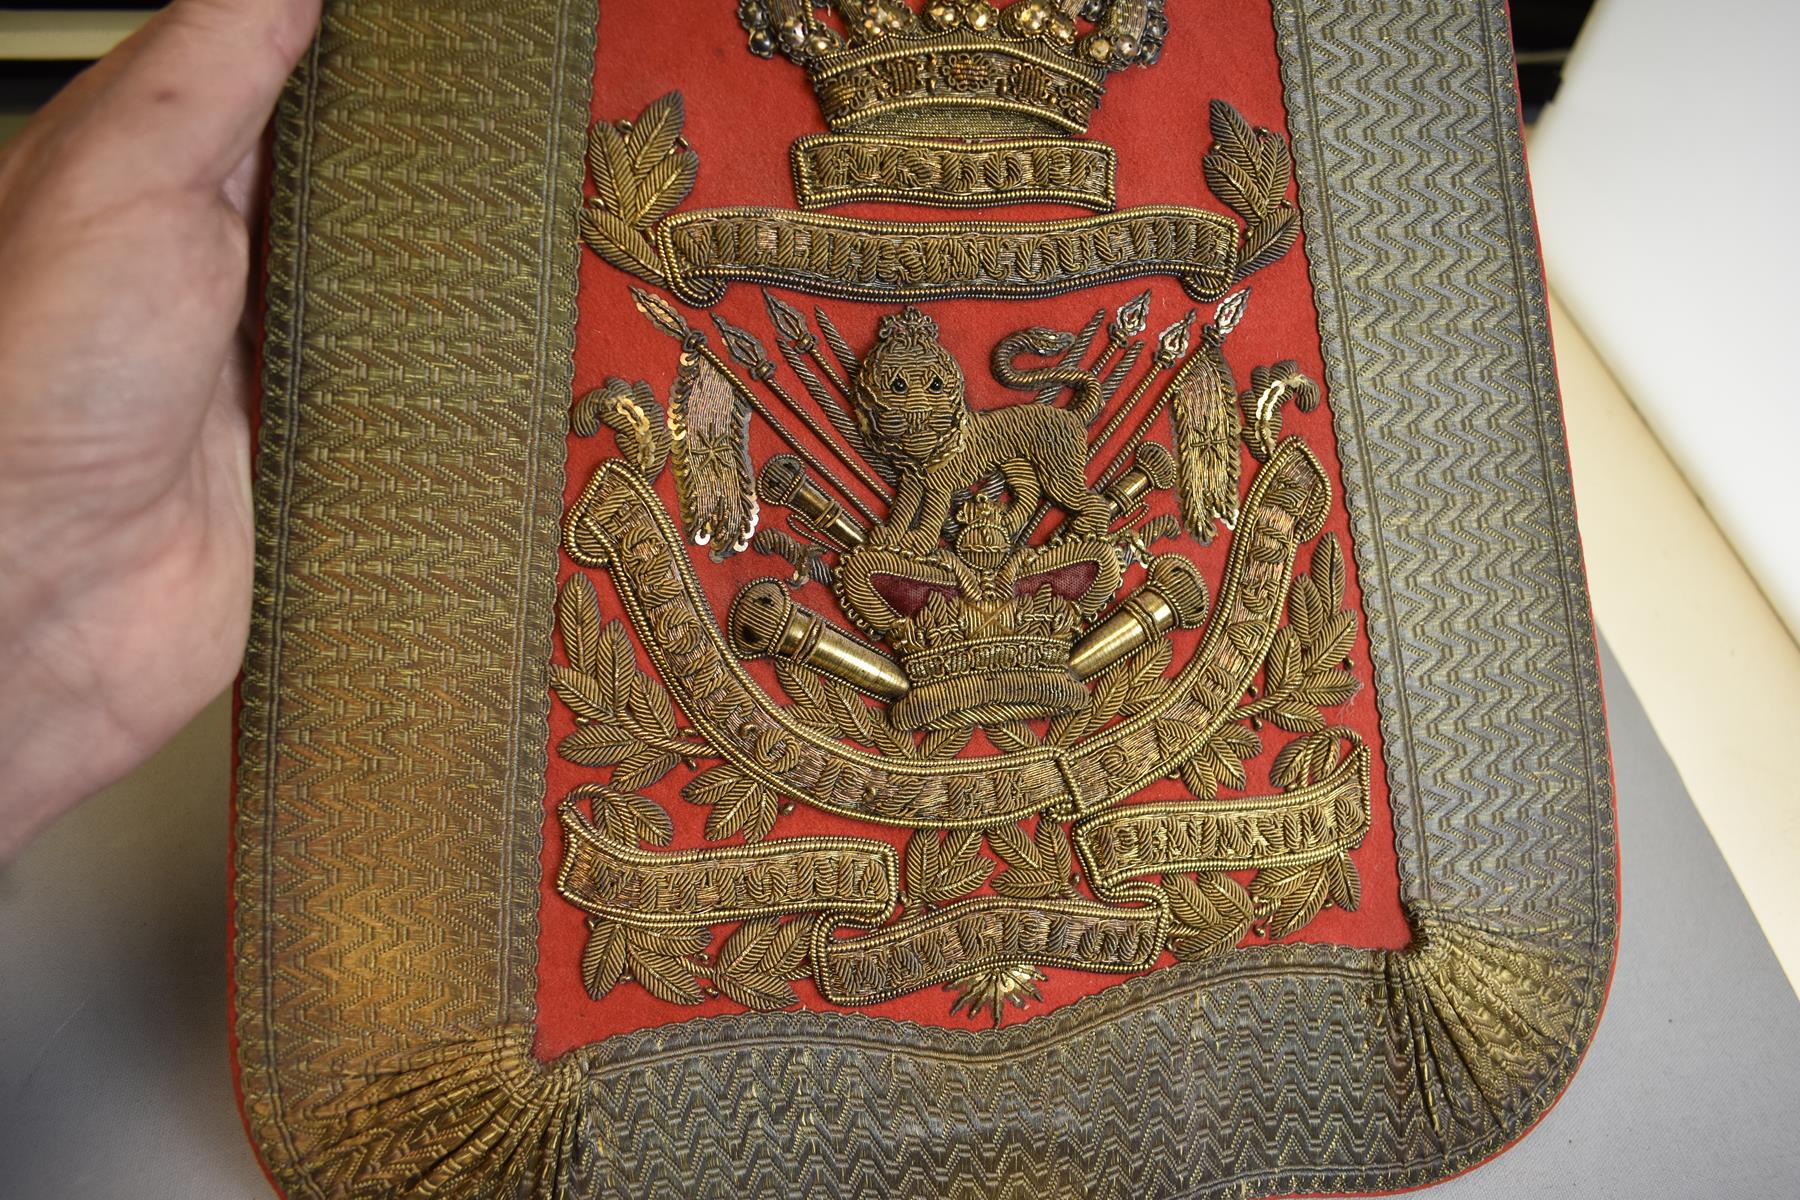 A FINE LARGE SIZE WILLIAM IV 15TH KING'S HUSSARS OFFICER'S SABRETACHE, the red felt flap with - Image 4 of 10